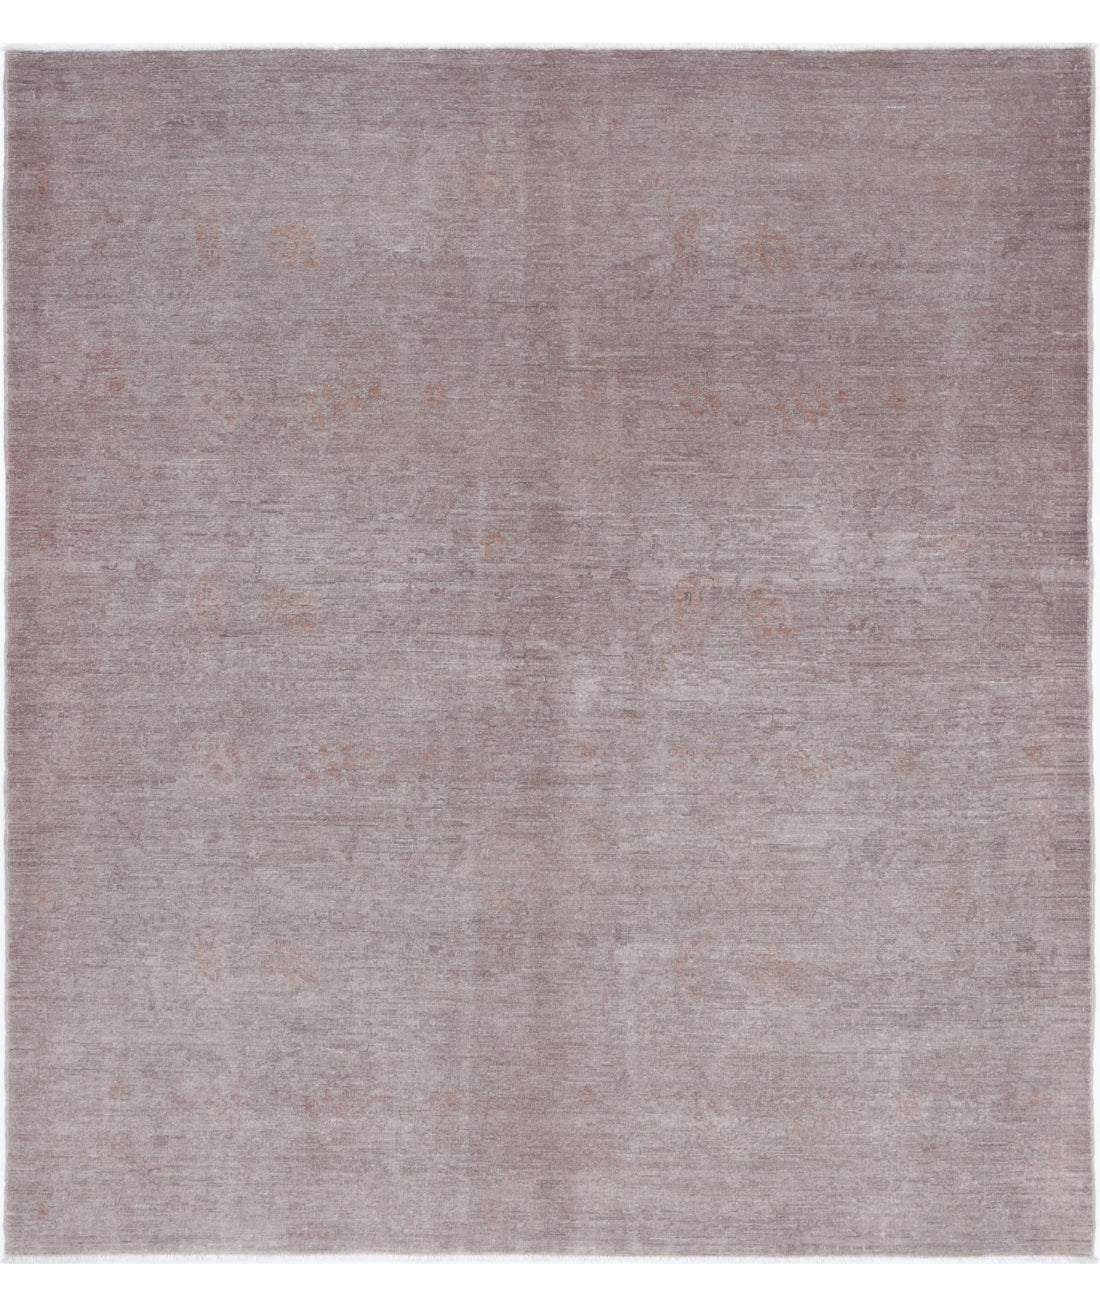 Hand Knotted Overdye Wool Rug - 5'10'' x 6'6'' 5'10'' x 6'6'' (175 X 195) / Taupe / Taupe